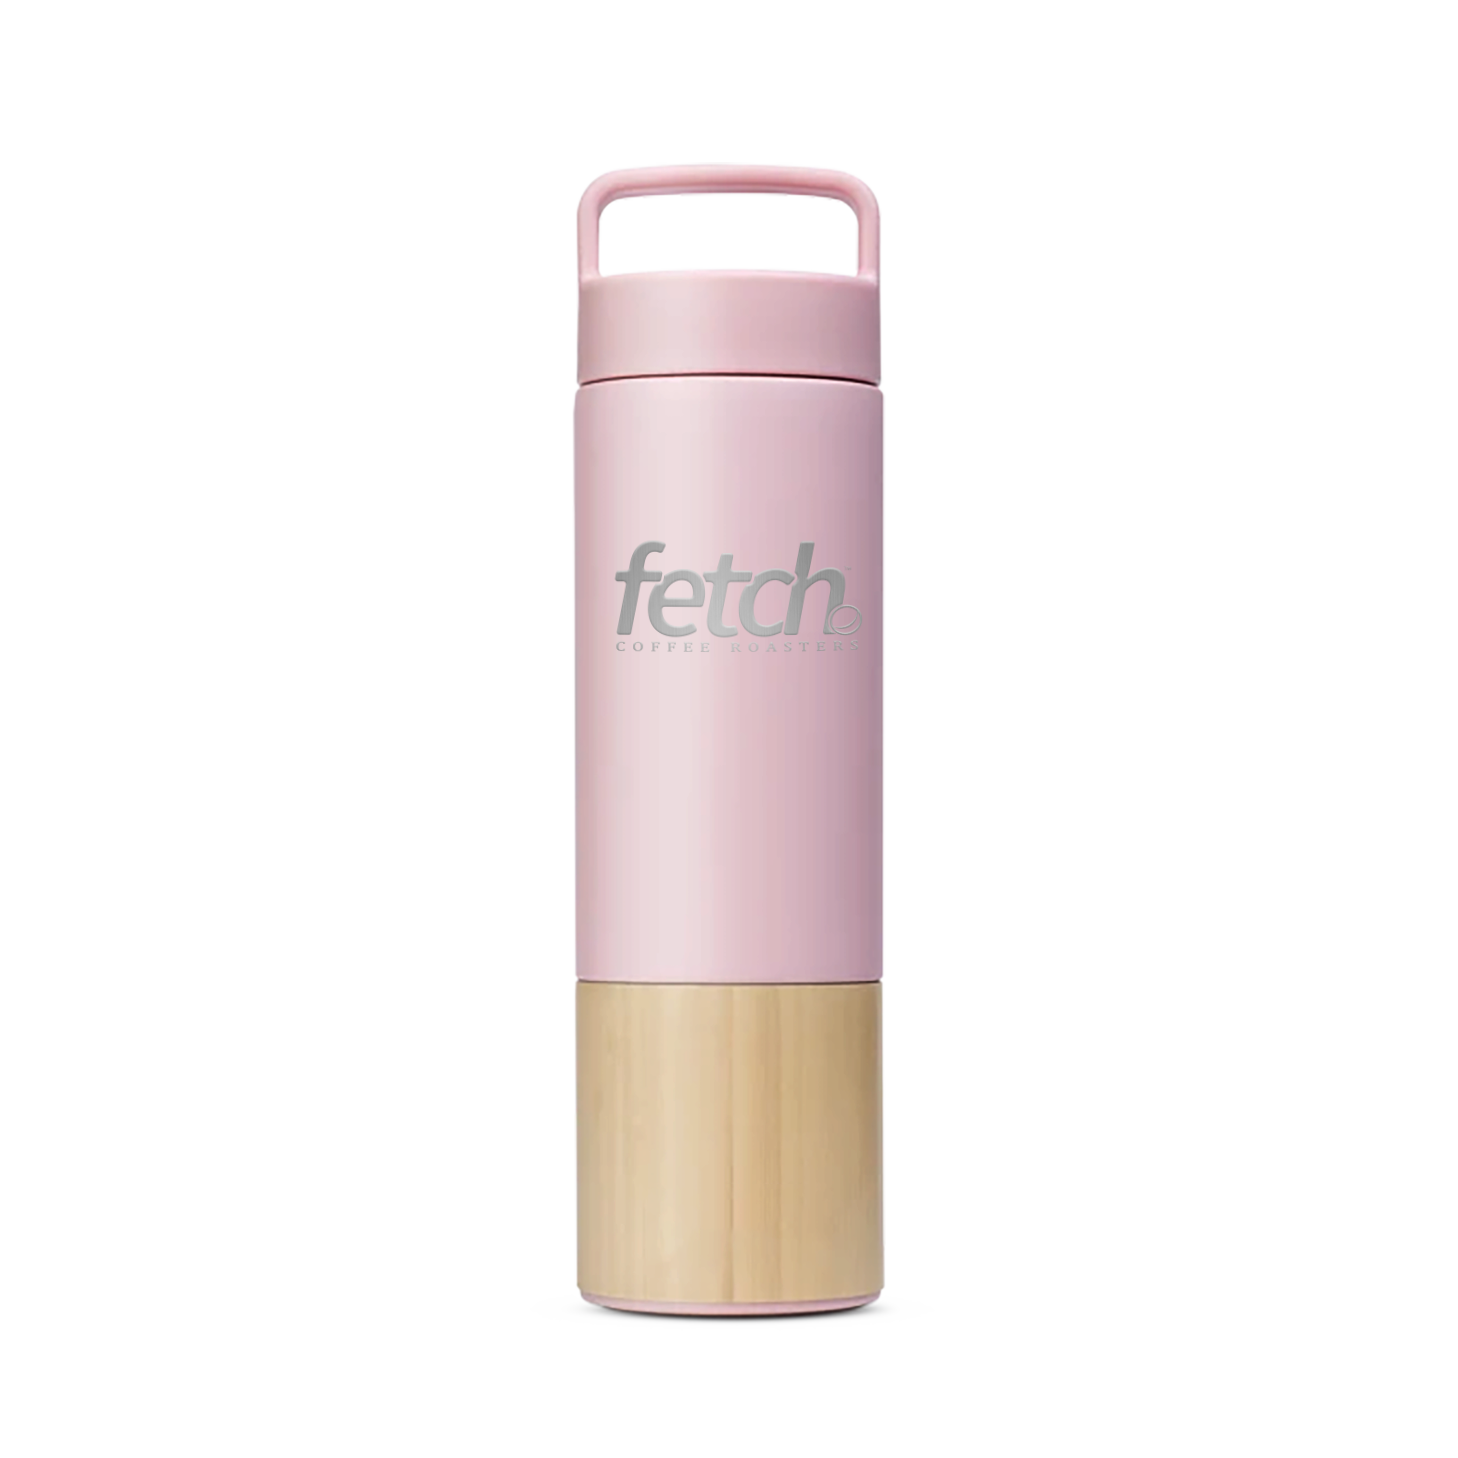 travel mug 18 ounce wellybottle Fetch coffee drinkware in rose and bamboo